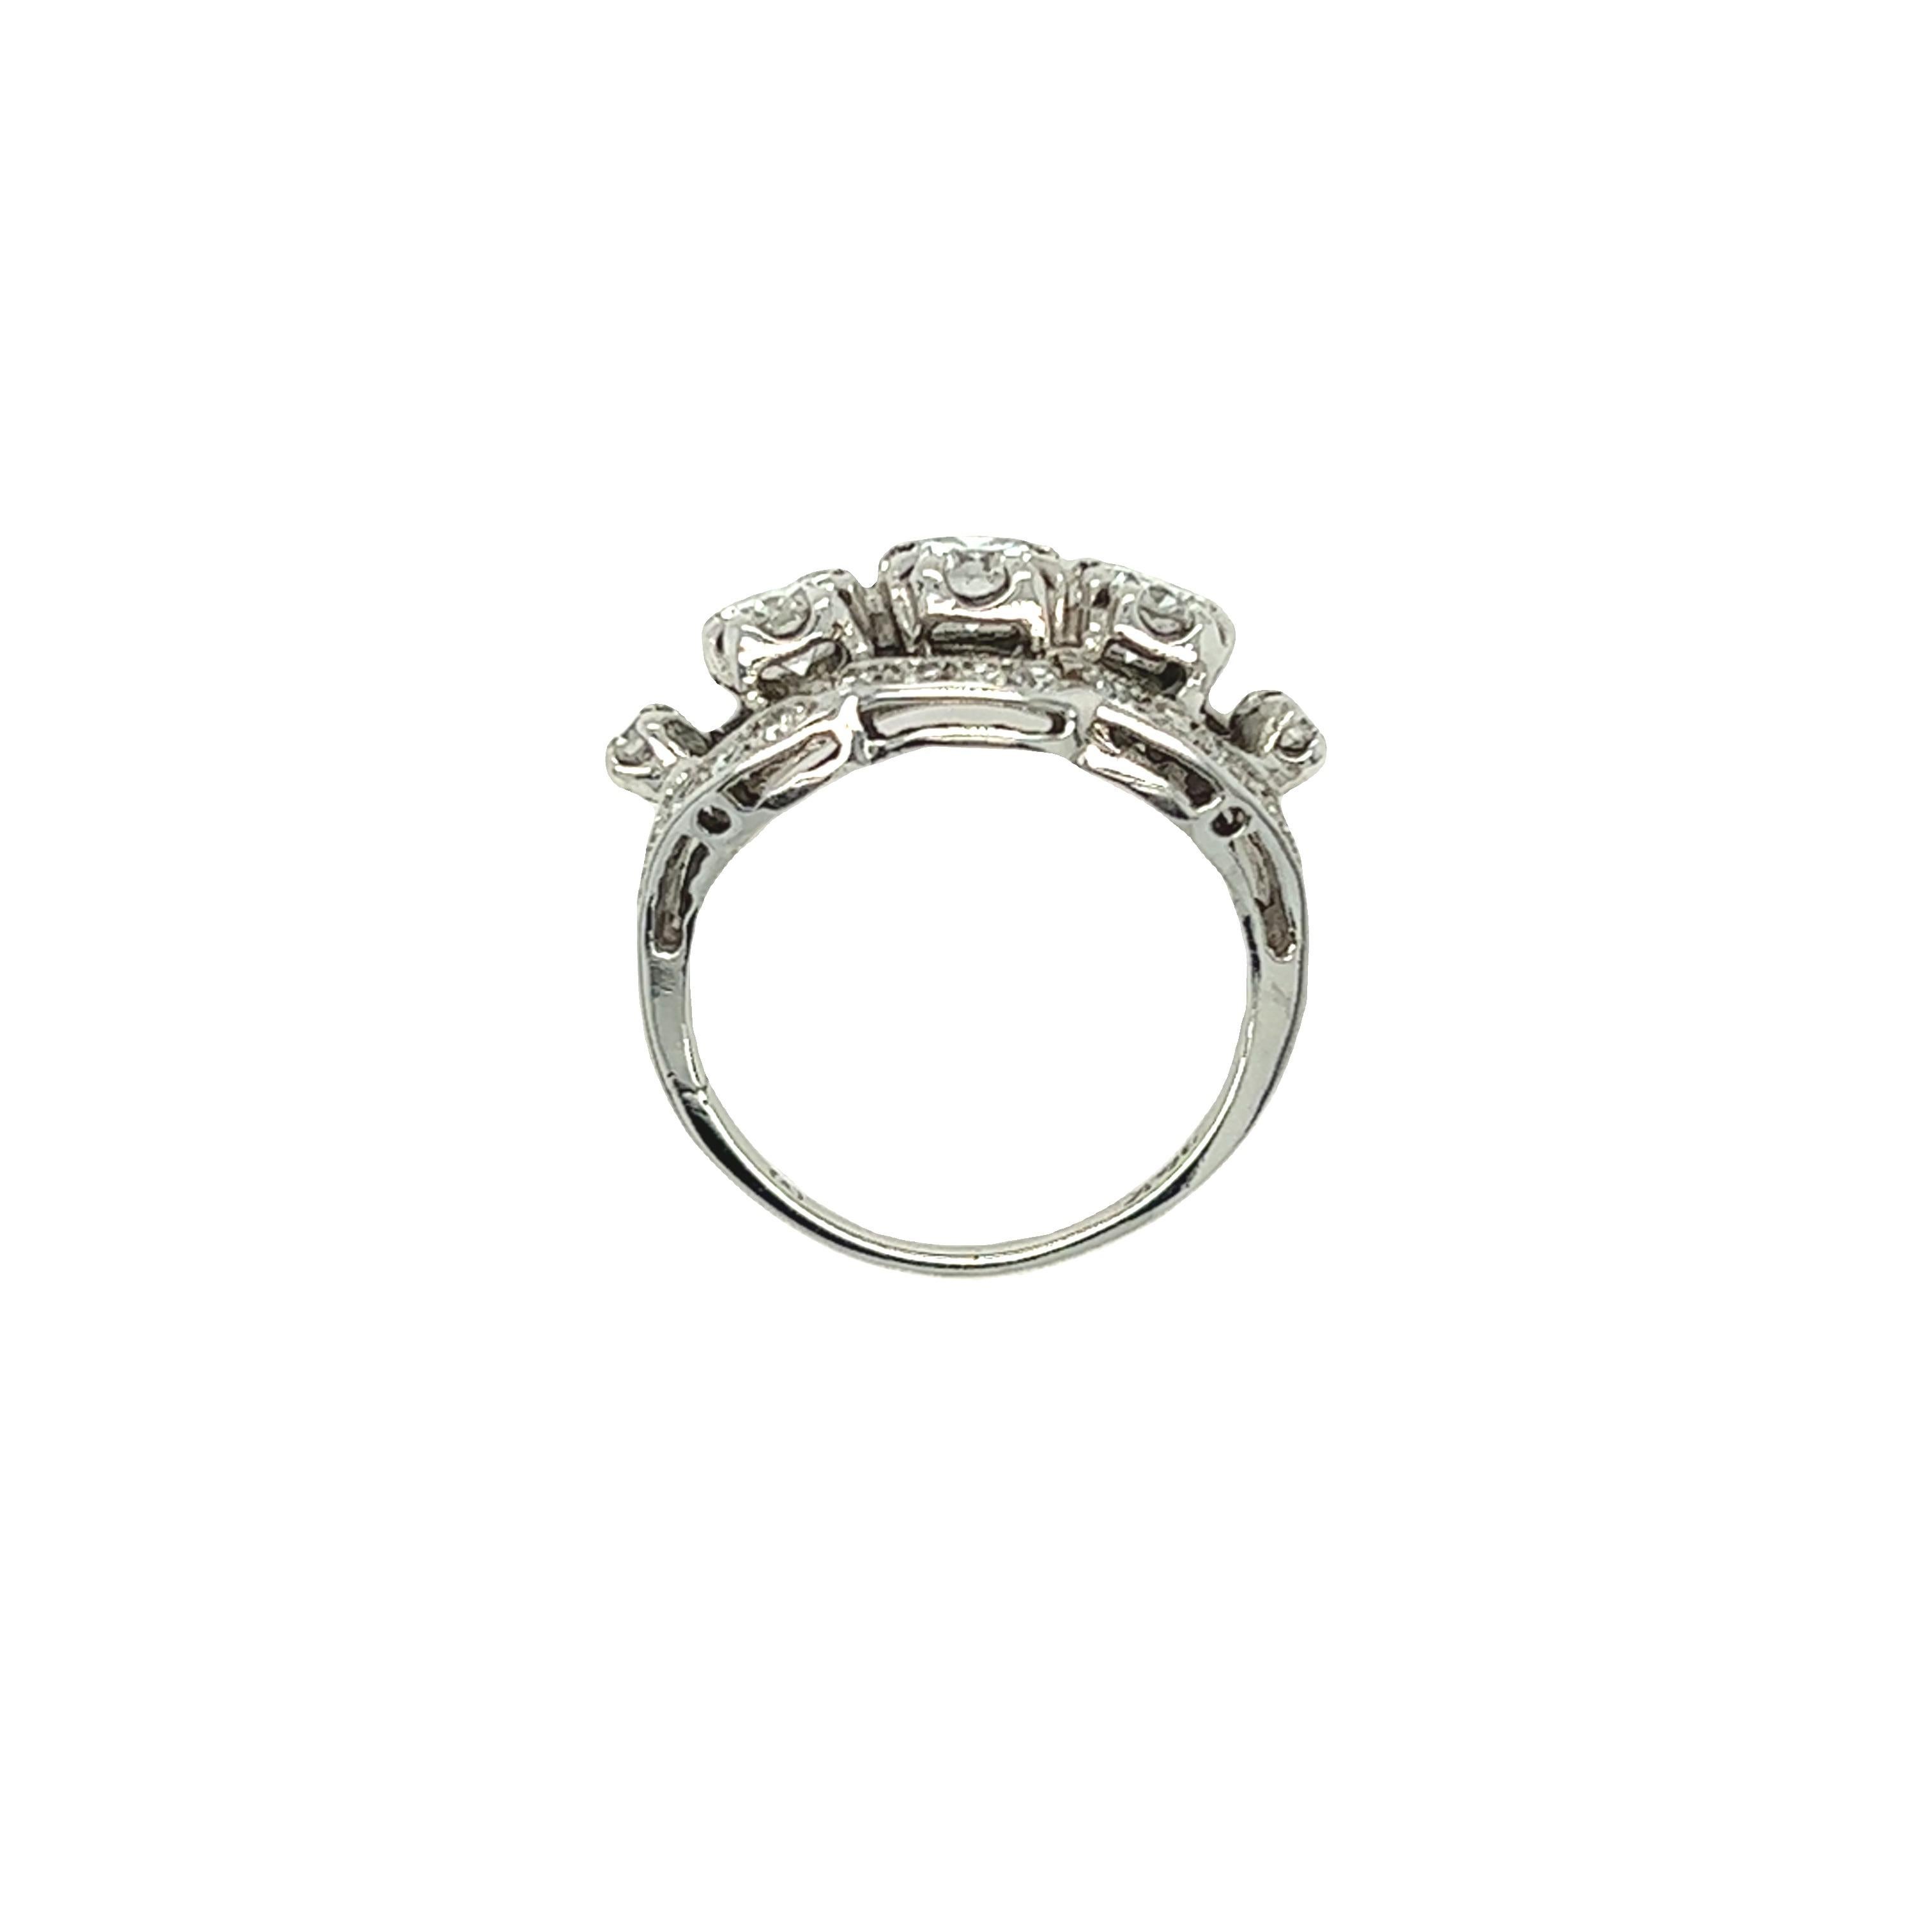 1.78 Cttw Vintage Three Stone Diamond Ring in 14K White Gold For Sale 1